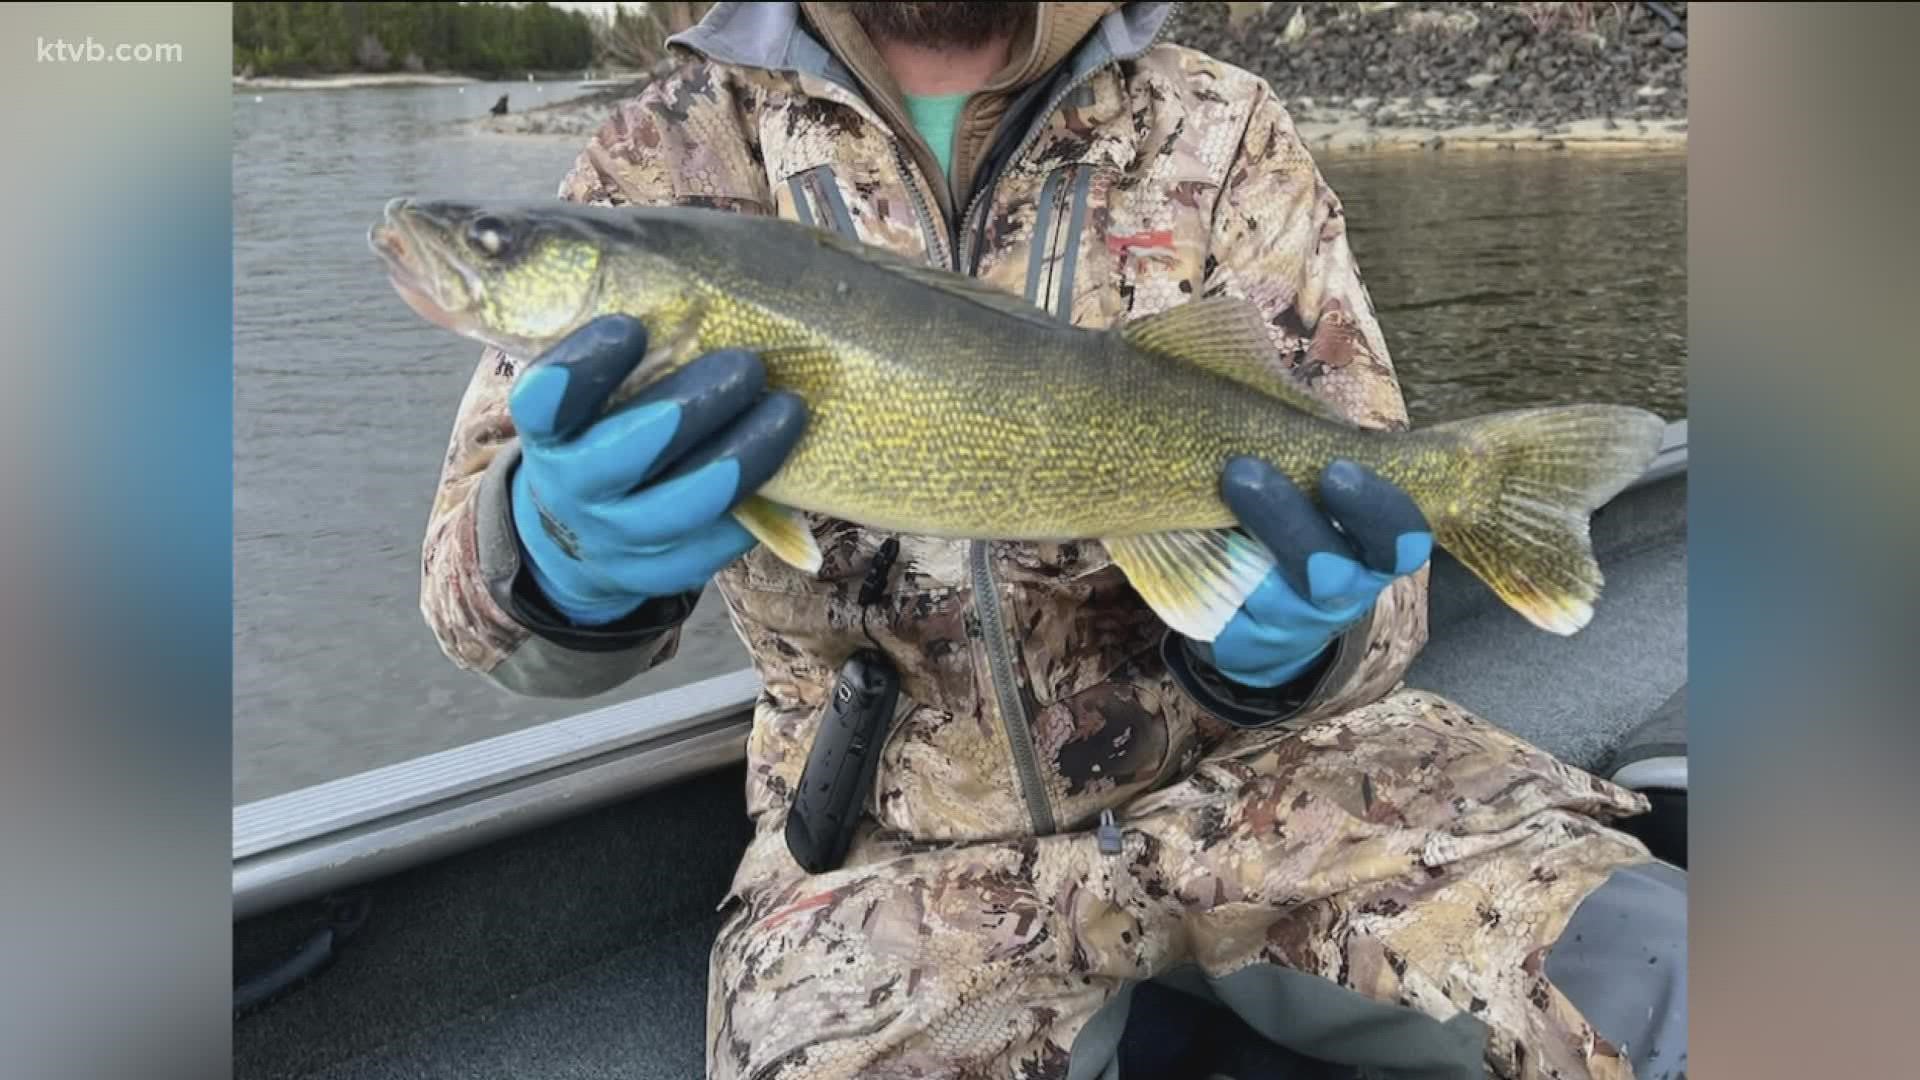 Walleyes are "incompatible" with the perch in Lake Cascade and its fisheries downstream, according to Idaho Fish & Game.